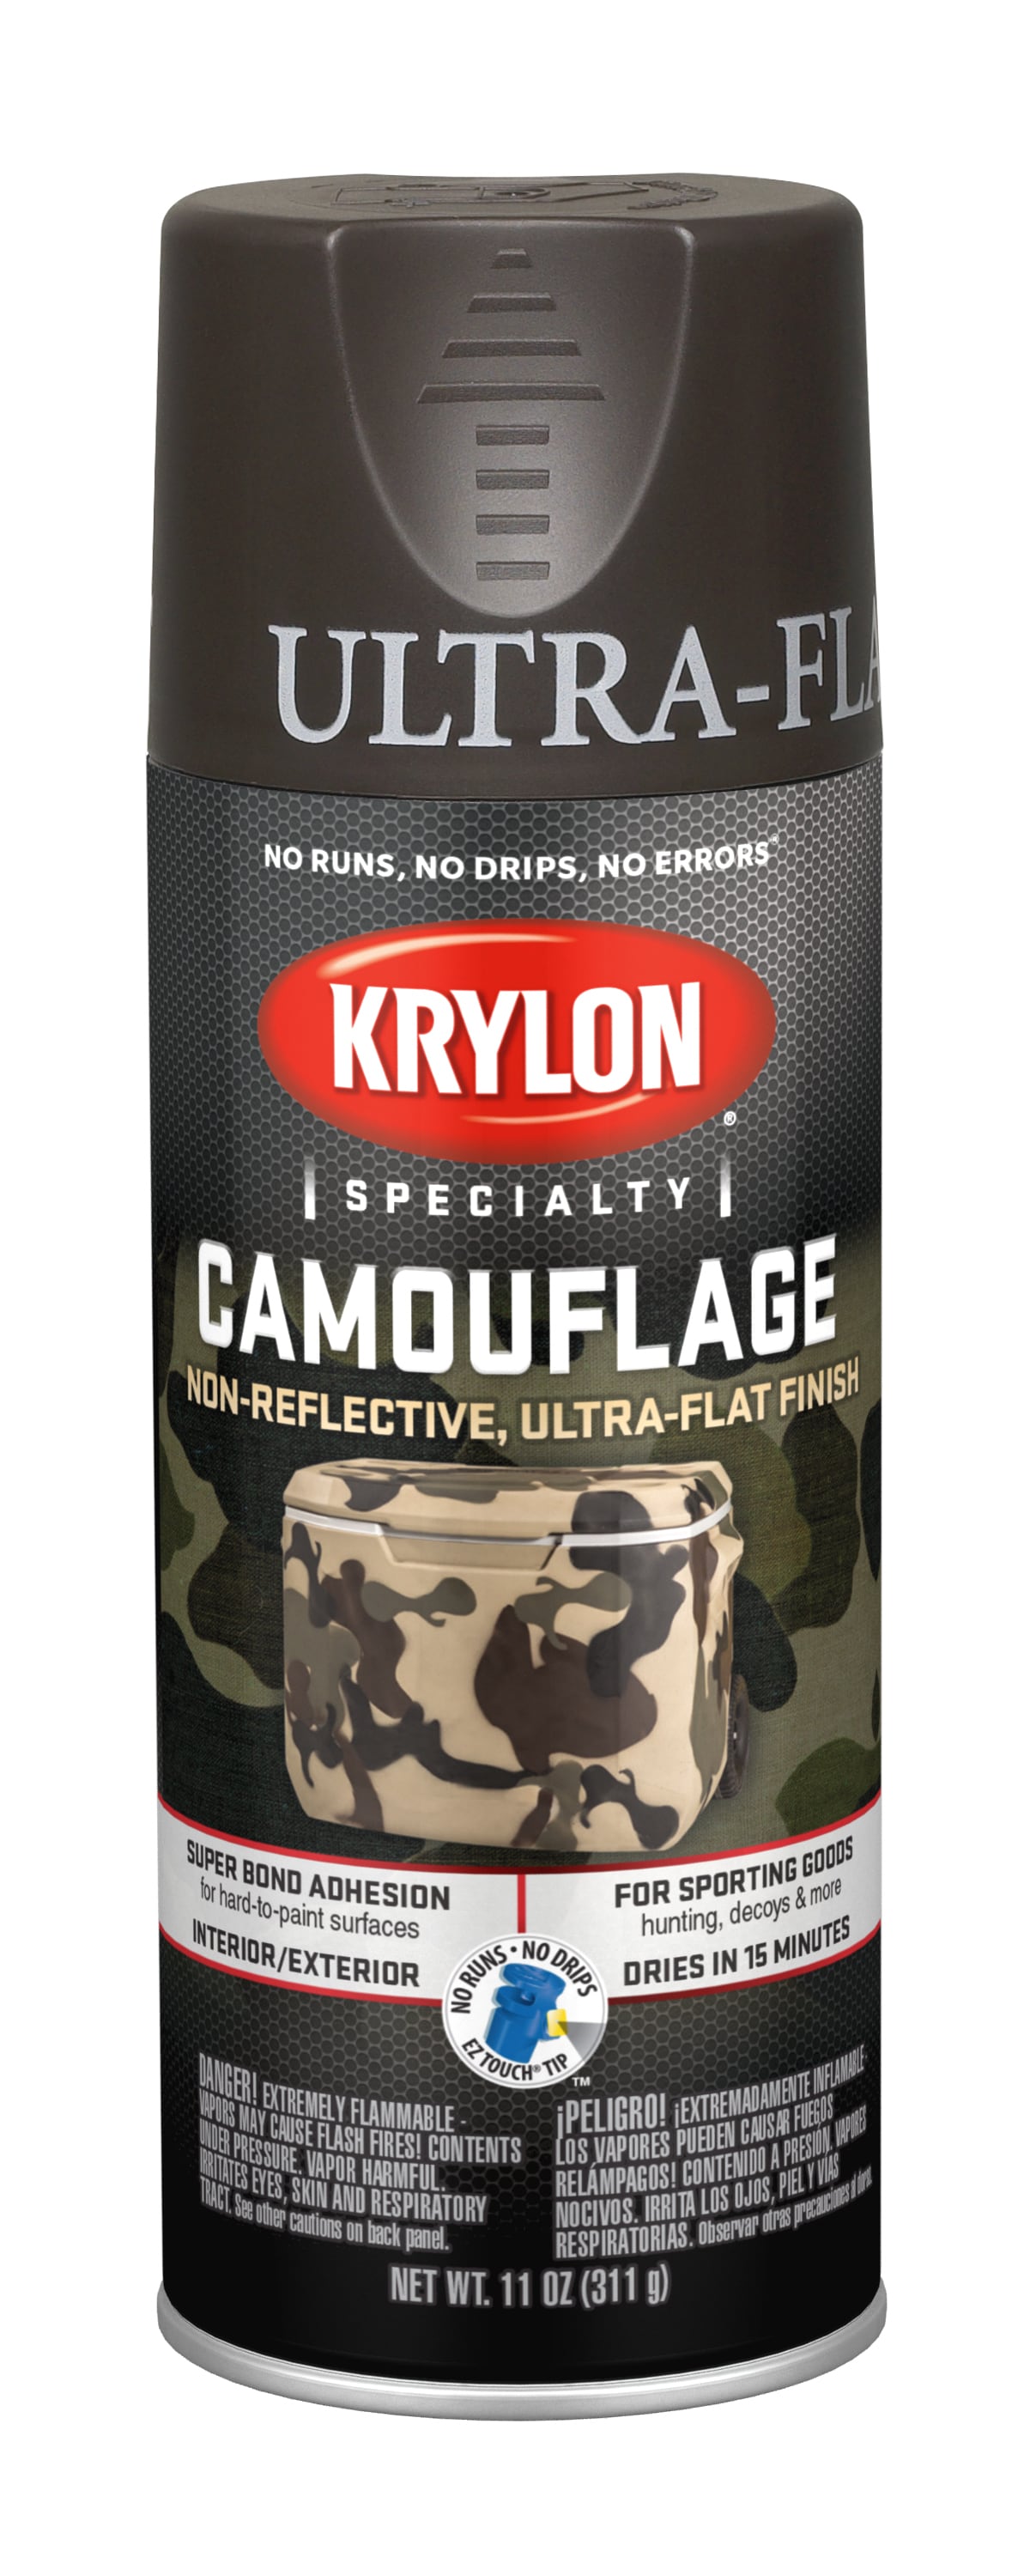 Spray paint CAMOUFLAGE, leather brown - Tegra State